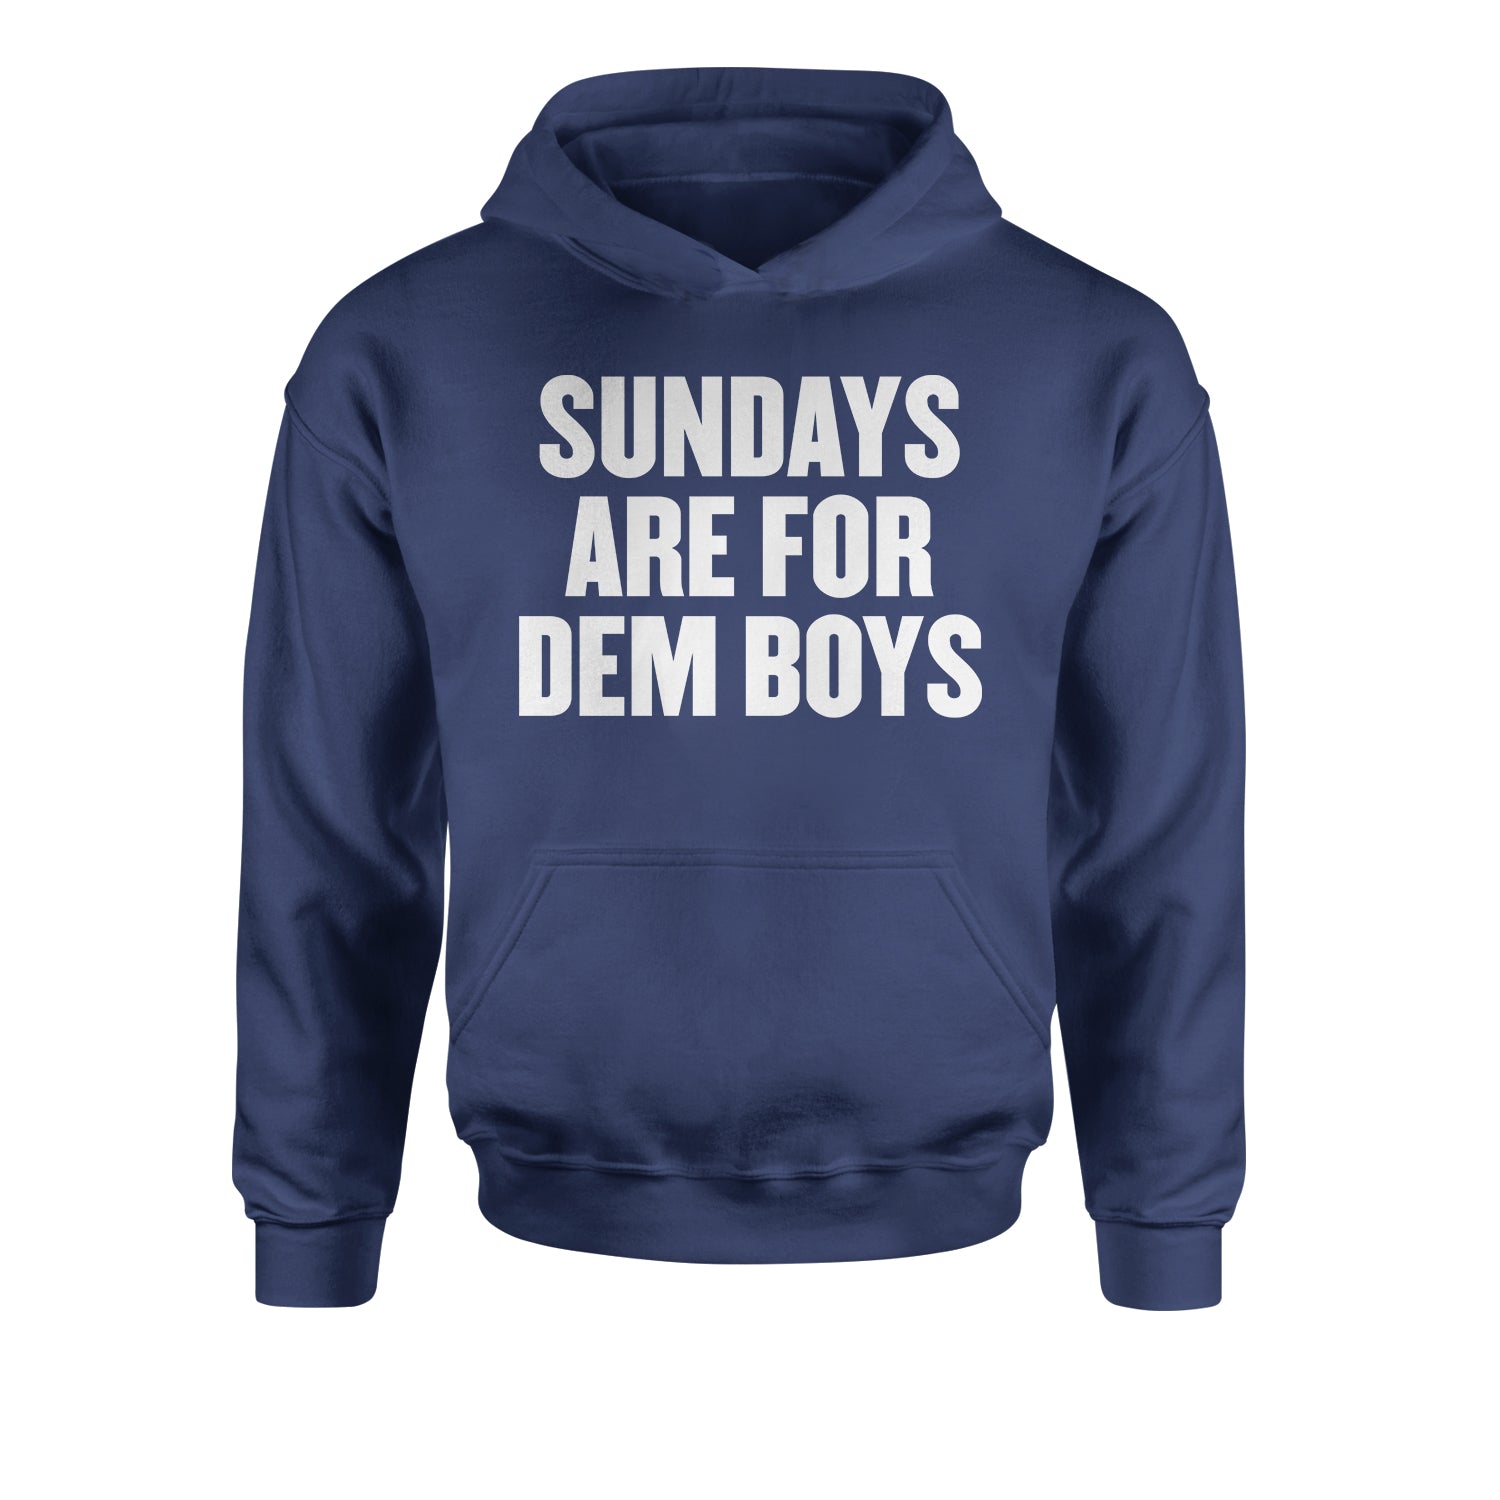 Sundays Are For Dem Boys Youth-Sized Hoodie dallas, fan, jersey, team, texas by Expression Tees